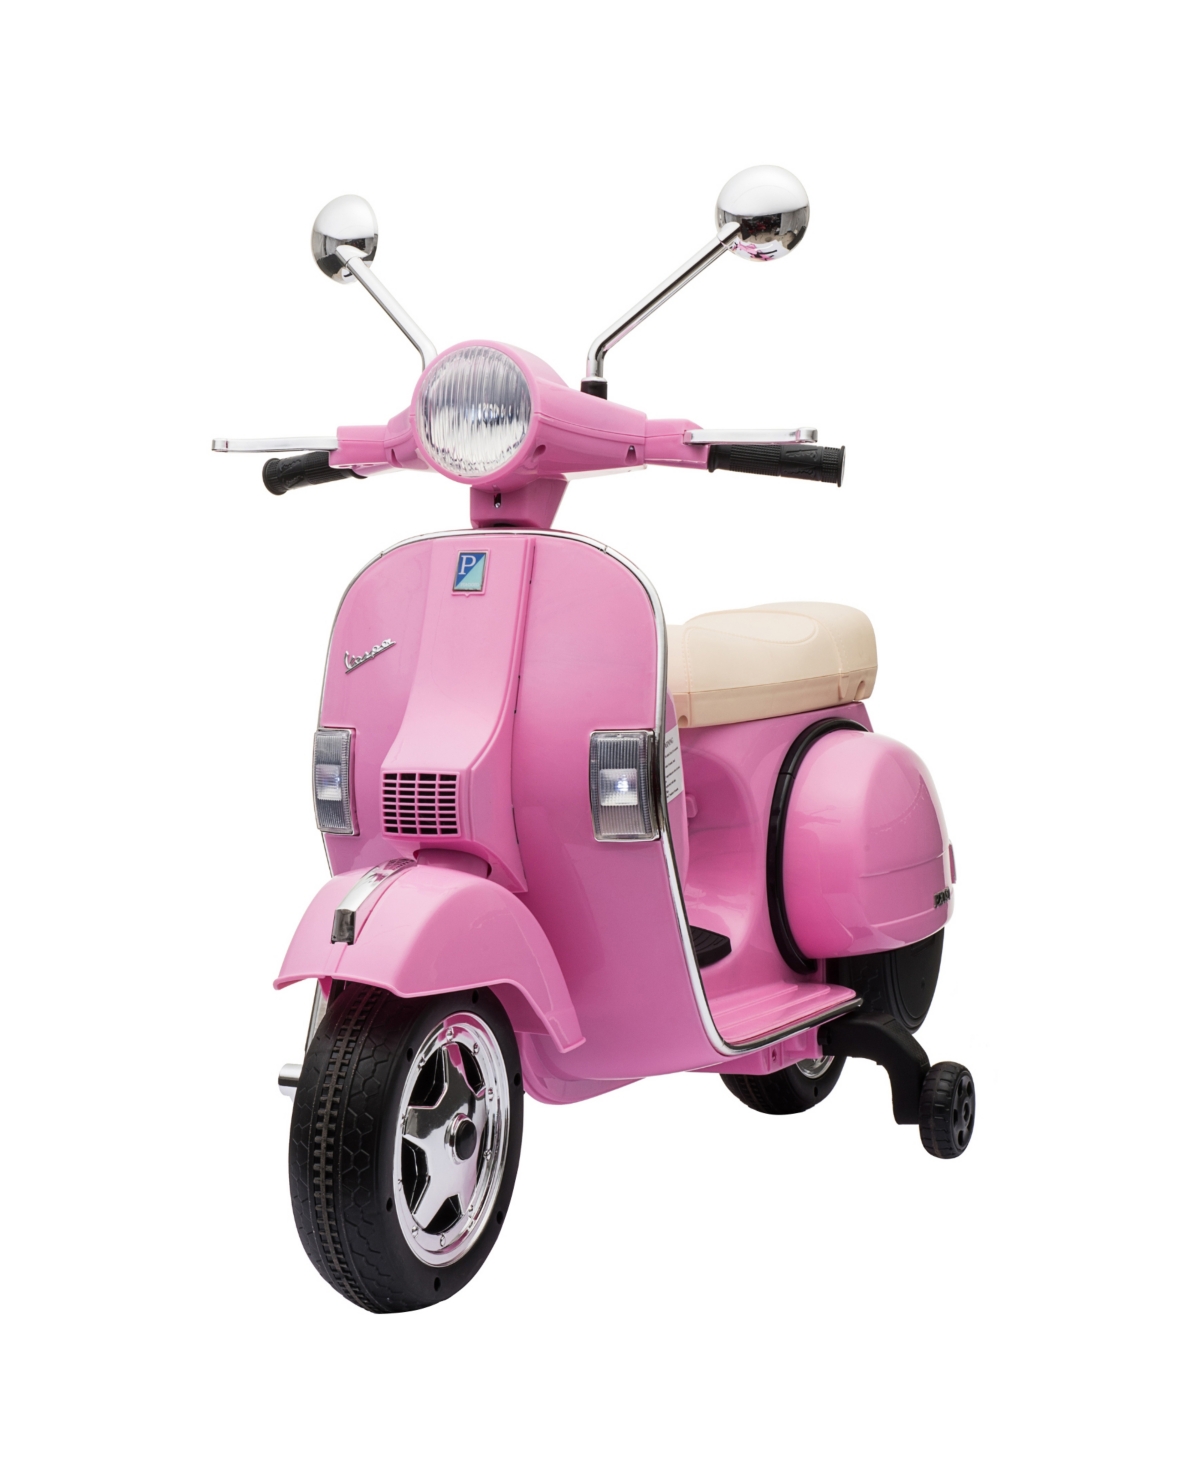 Best Ride On Cars Kids' Vespa Scooter 12v Powered Ride-on In Pink